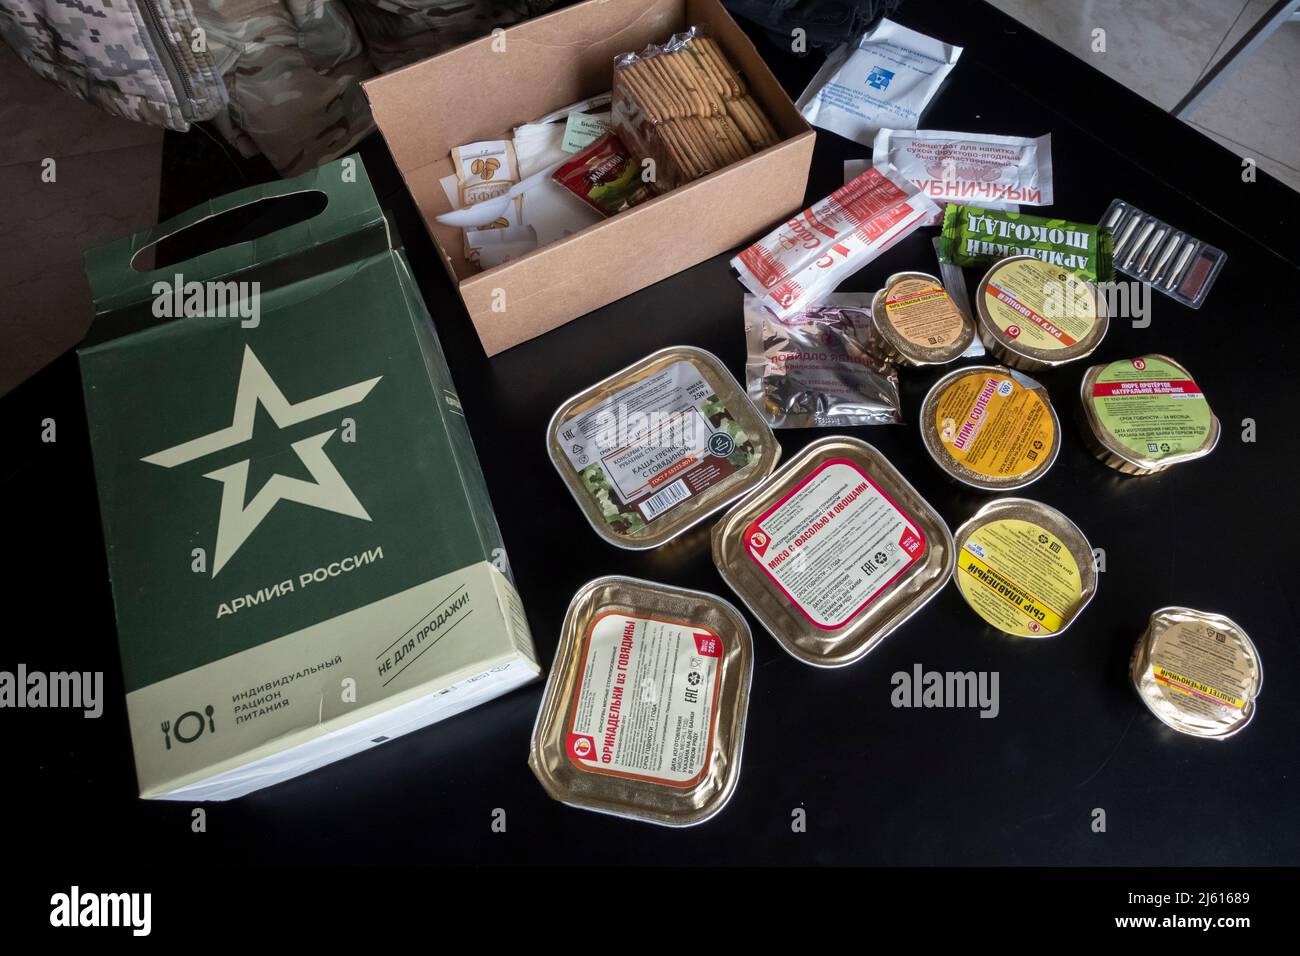 KYIV, UKRAINE 06 March. An IRP-P Russian combat food ration captured by Ukrainian army, as Russia's invasion of Ukraine continues on 06 March 2022 in Kiev, Ukraine. Russia began a military invasion of Ukraine after Russia's parliament approved treaties with two breakaway regions in eastern Ukraine. It is the largest military conflict in Europe since World War II. Stock Photo